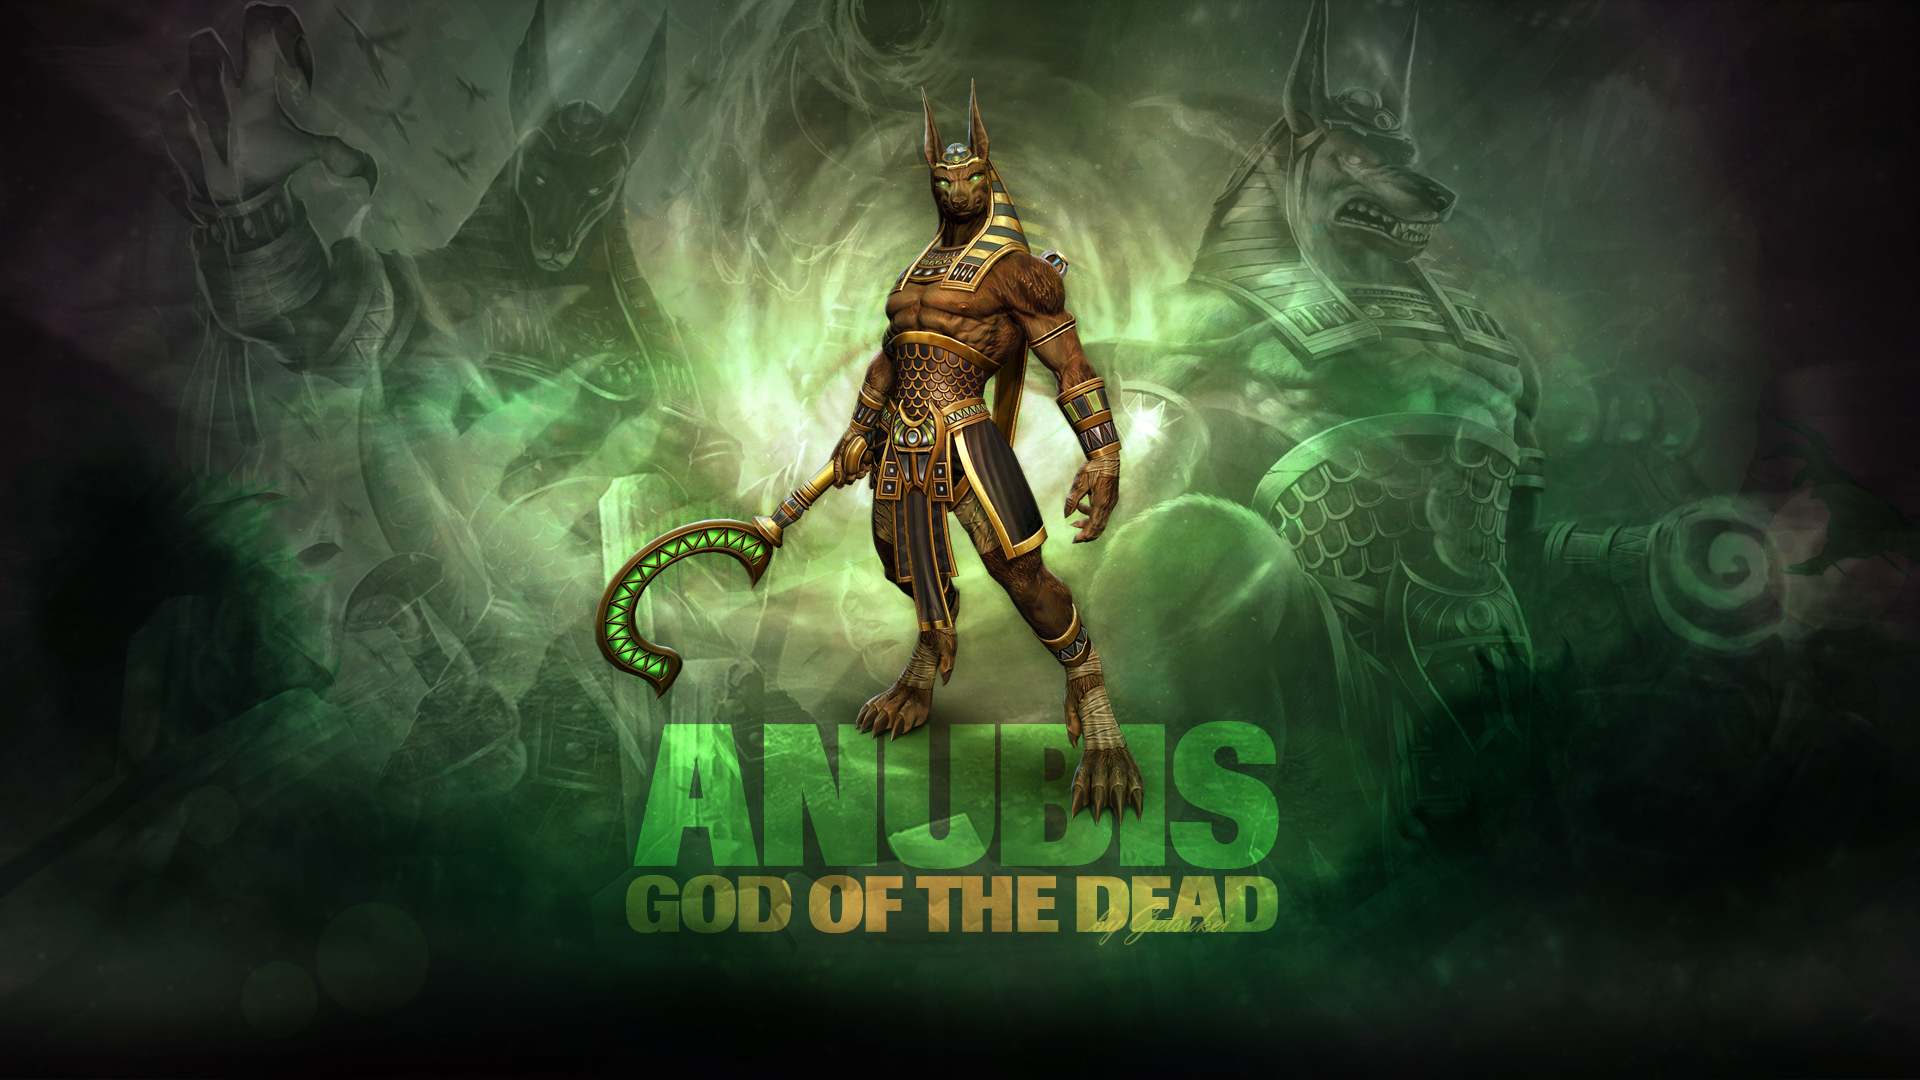 SMITE Anubis God of the Dead Wallpaper by Getsukeii